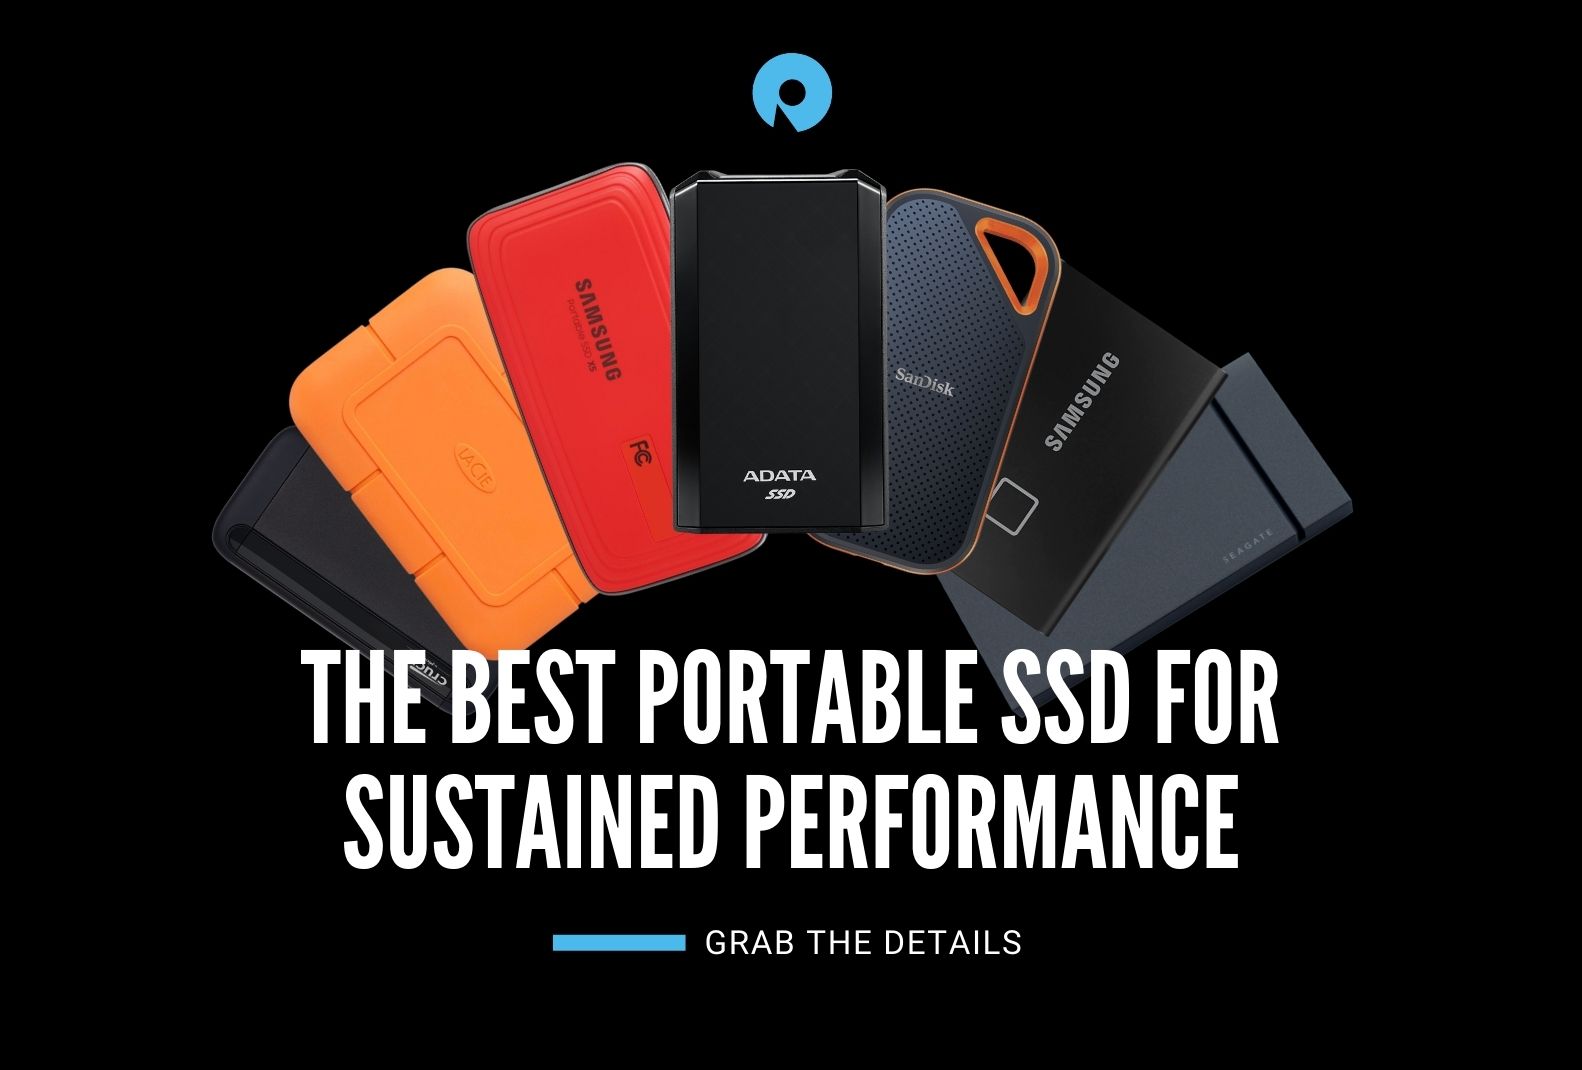 Best Portable SSD for Editing - Samsung T7 SSD Review